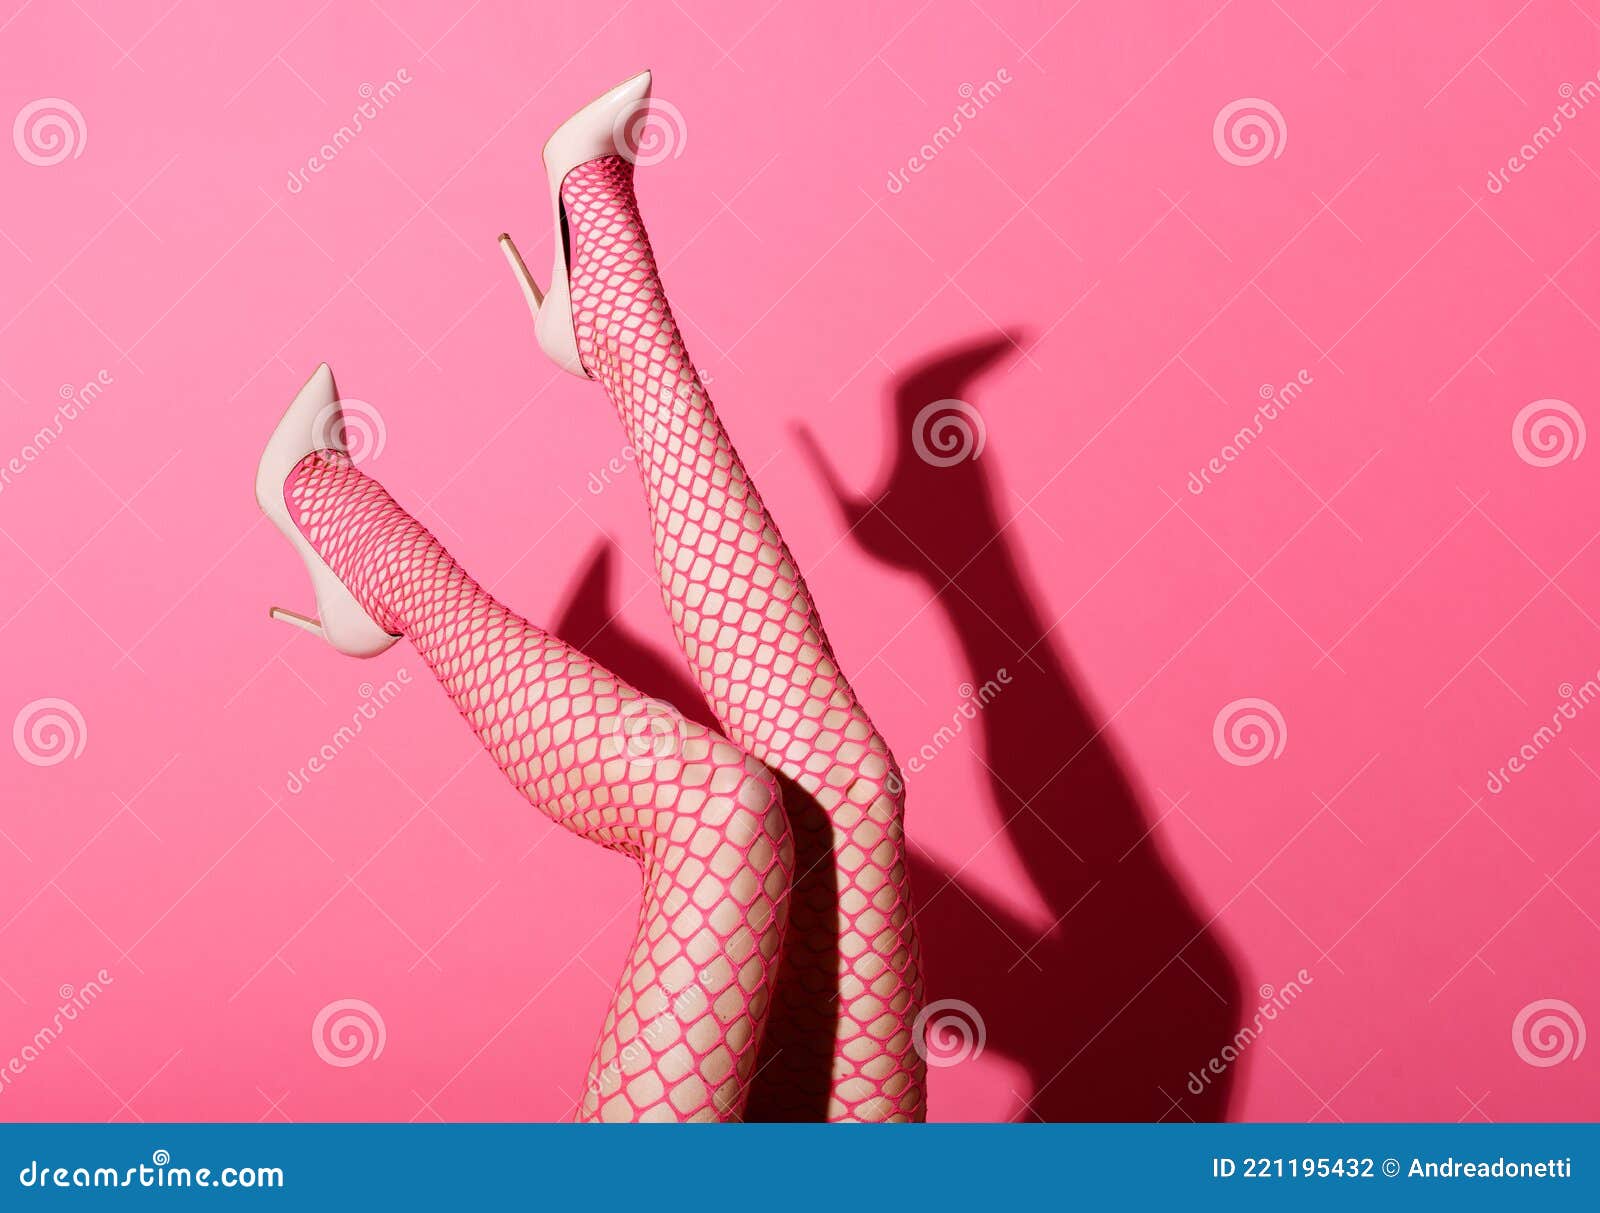 Shapely Legs of a Woman Wearing Pink Fishnet Stockings Stock Photo